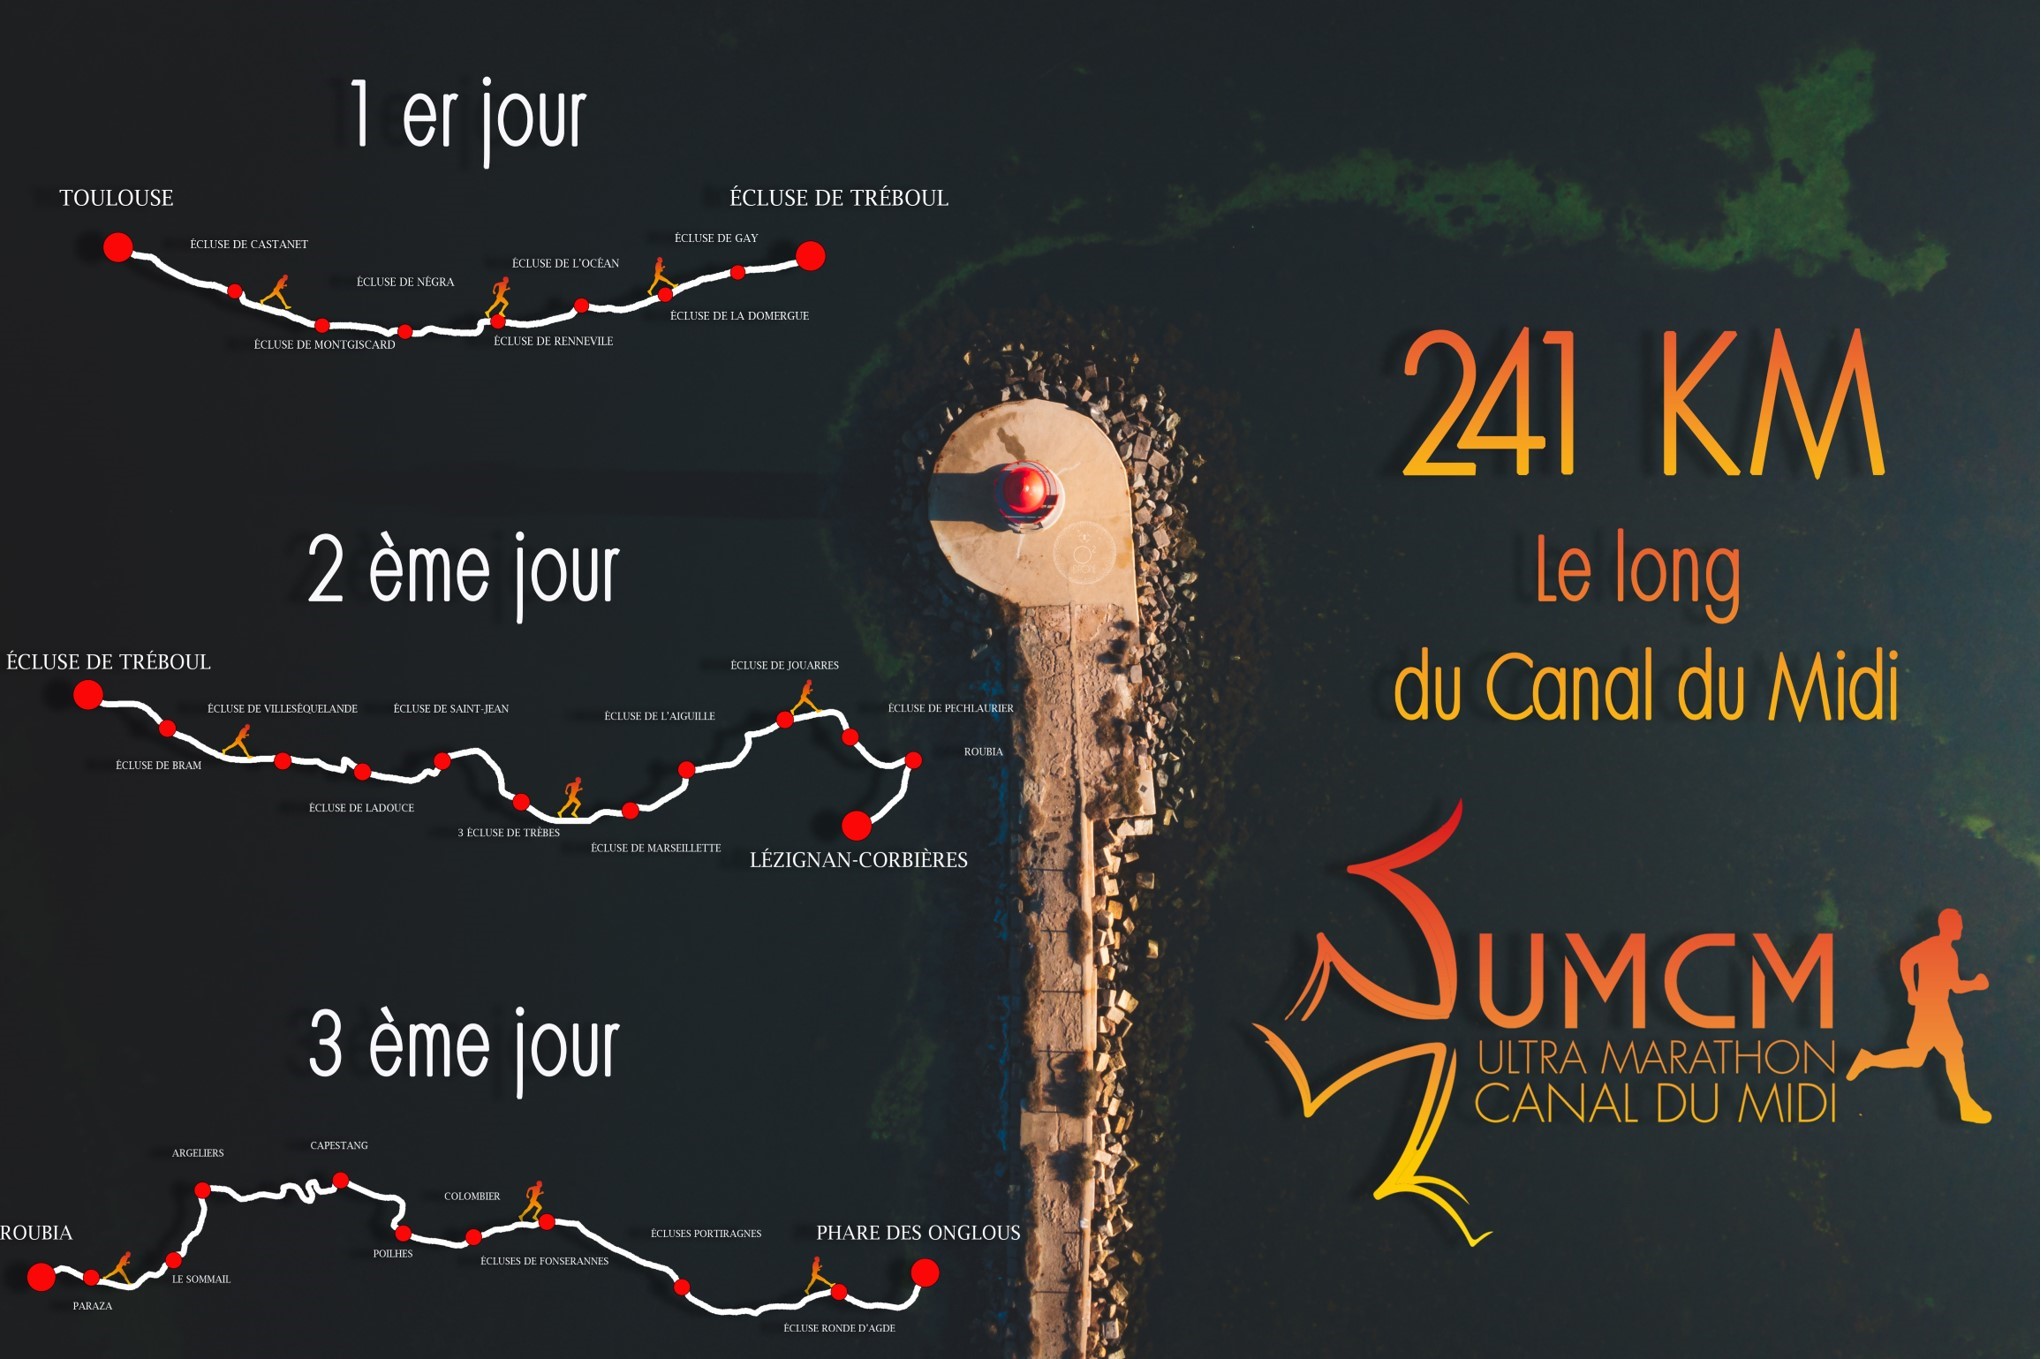 Film screening for charity in Lézignan-Corbières on February 25 of the documentary about the “Ultra Marathon along the canal du Midi” by Hamim El Ouardi – pushing yourself to the limits to raise the profile of social and environmental causes.